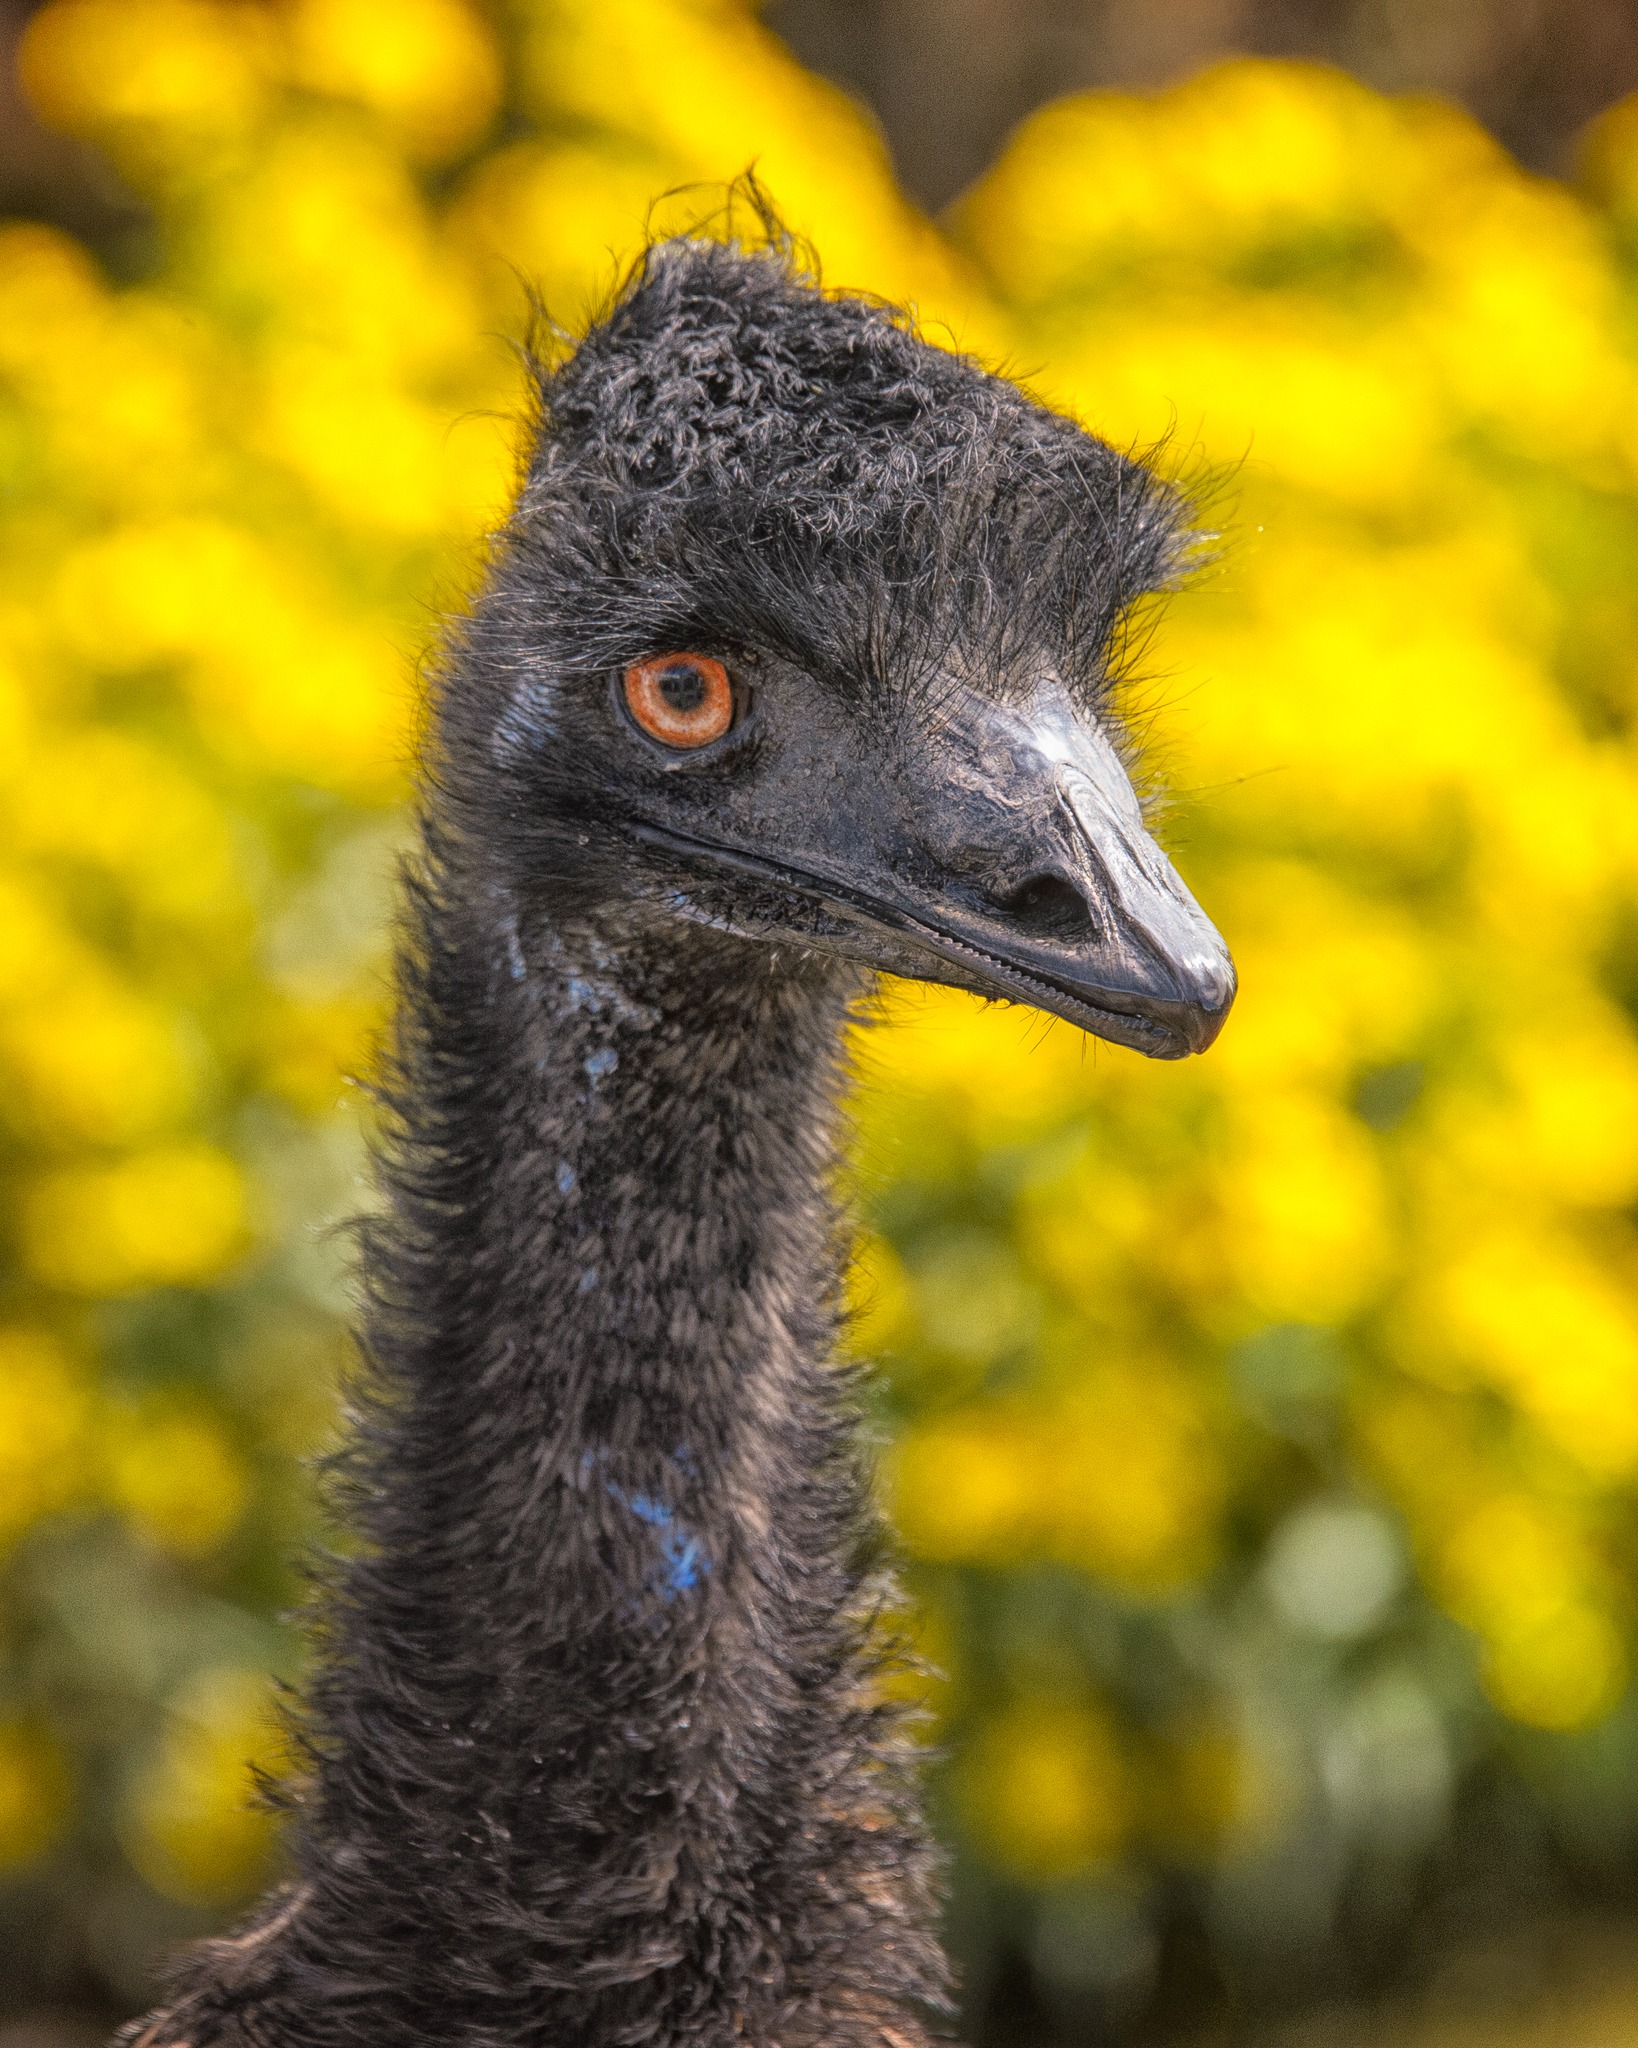 The emu is the second-largest living bird by height, after its flightless relative, the ostrich. There are several emus at the Colorado Gators rescue near Hooper, Colorado, down the road from Great Sand Dunes National Park.